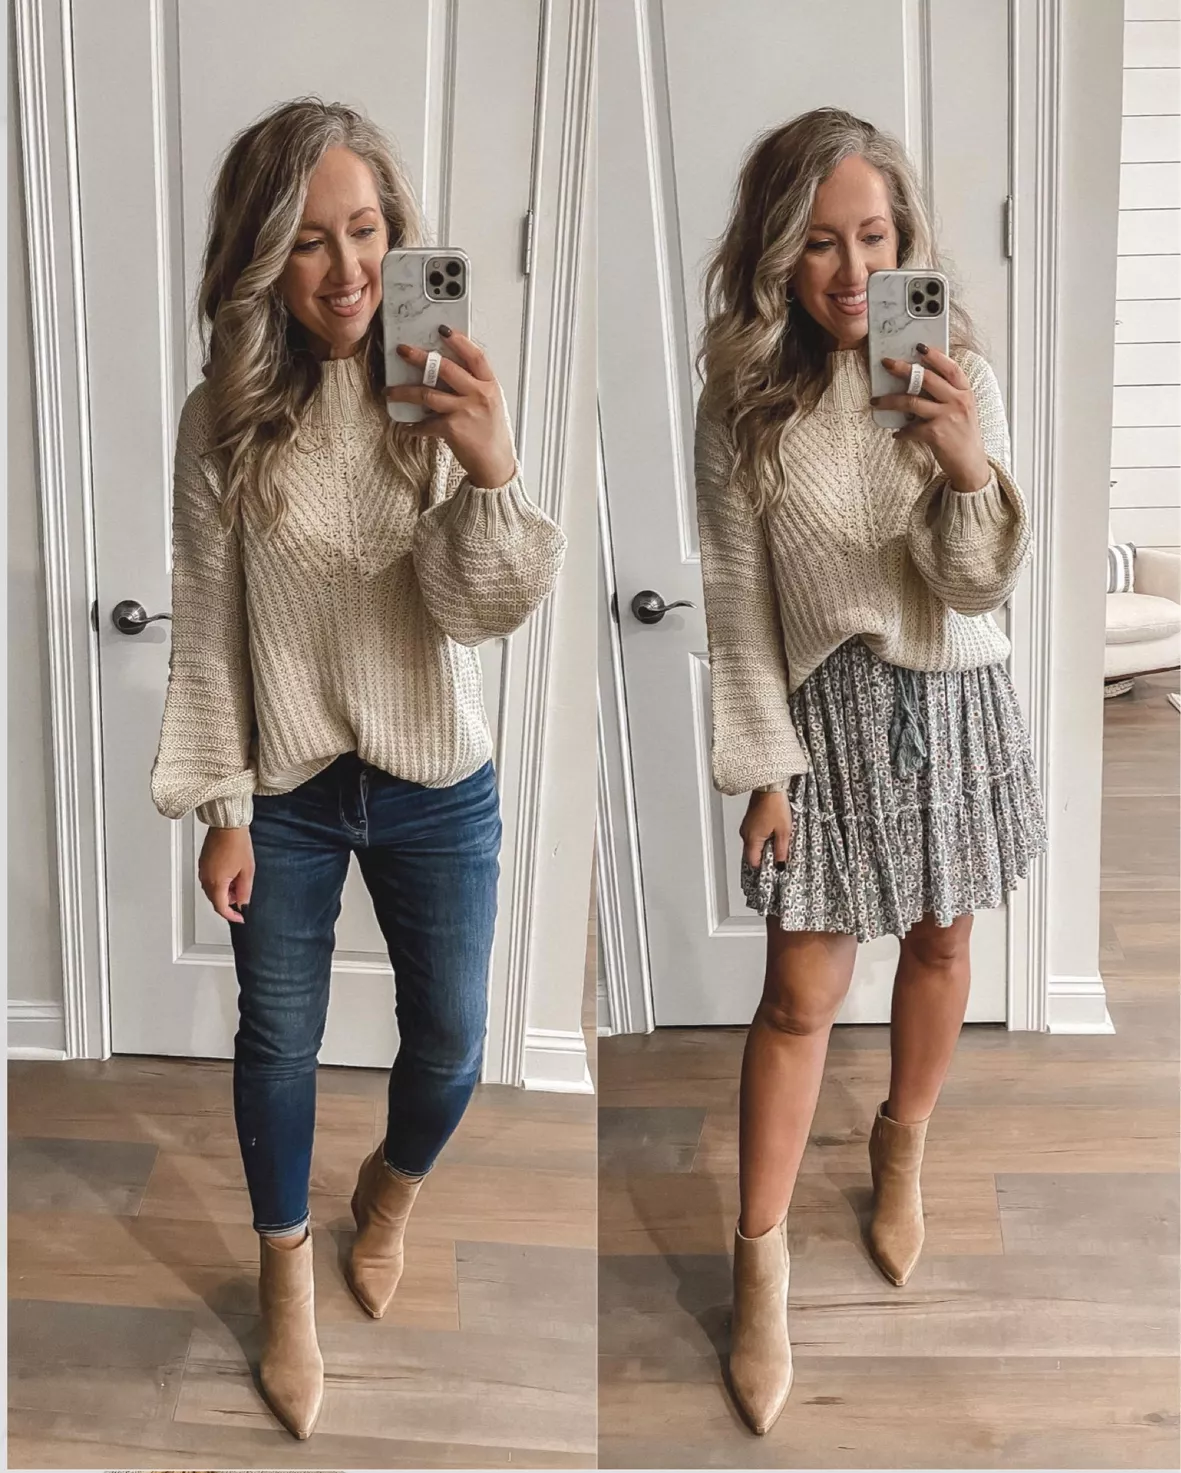 lawoffashionblog's Fall outfits Collection on LTK